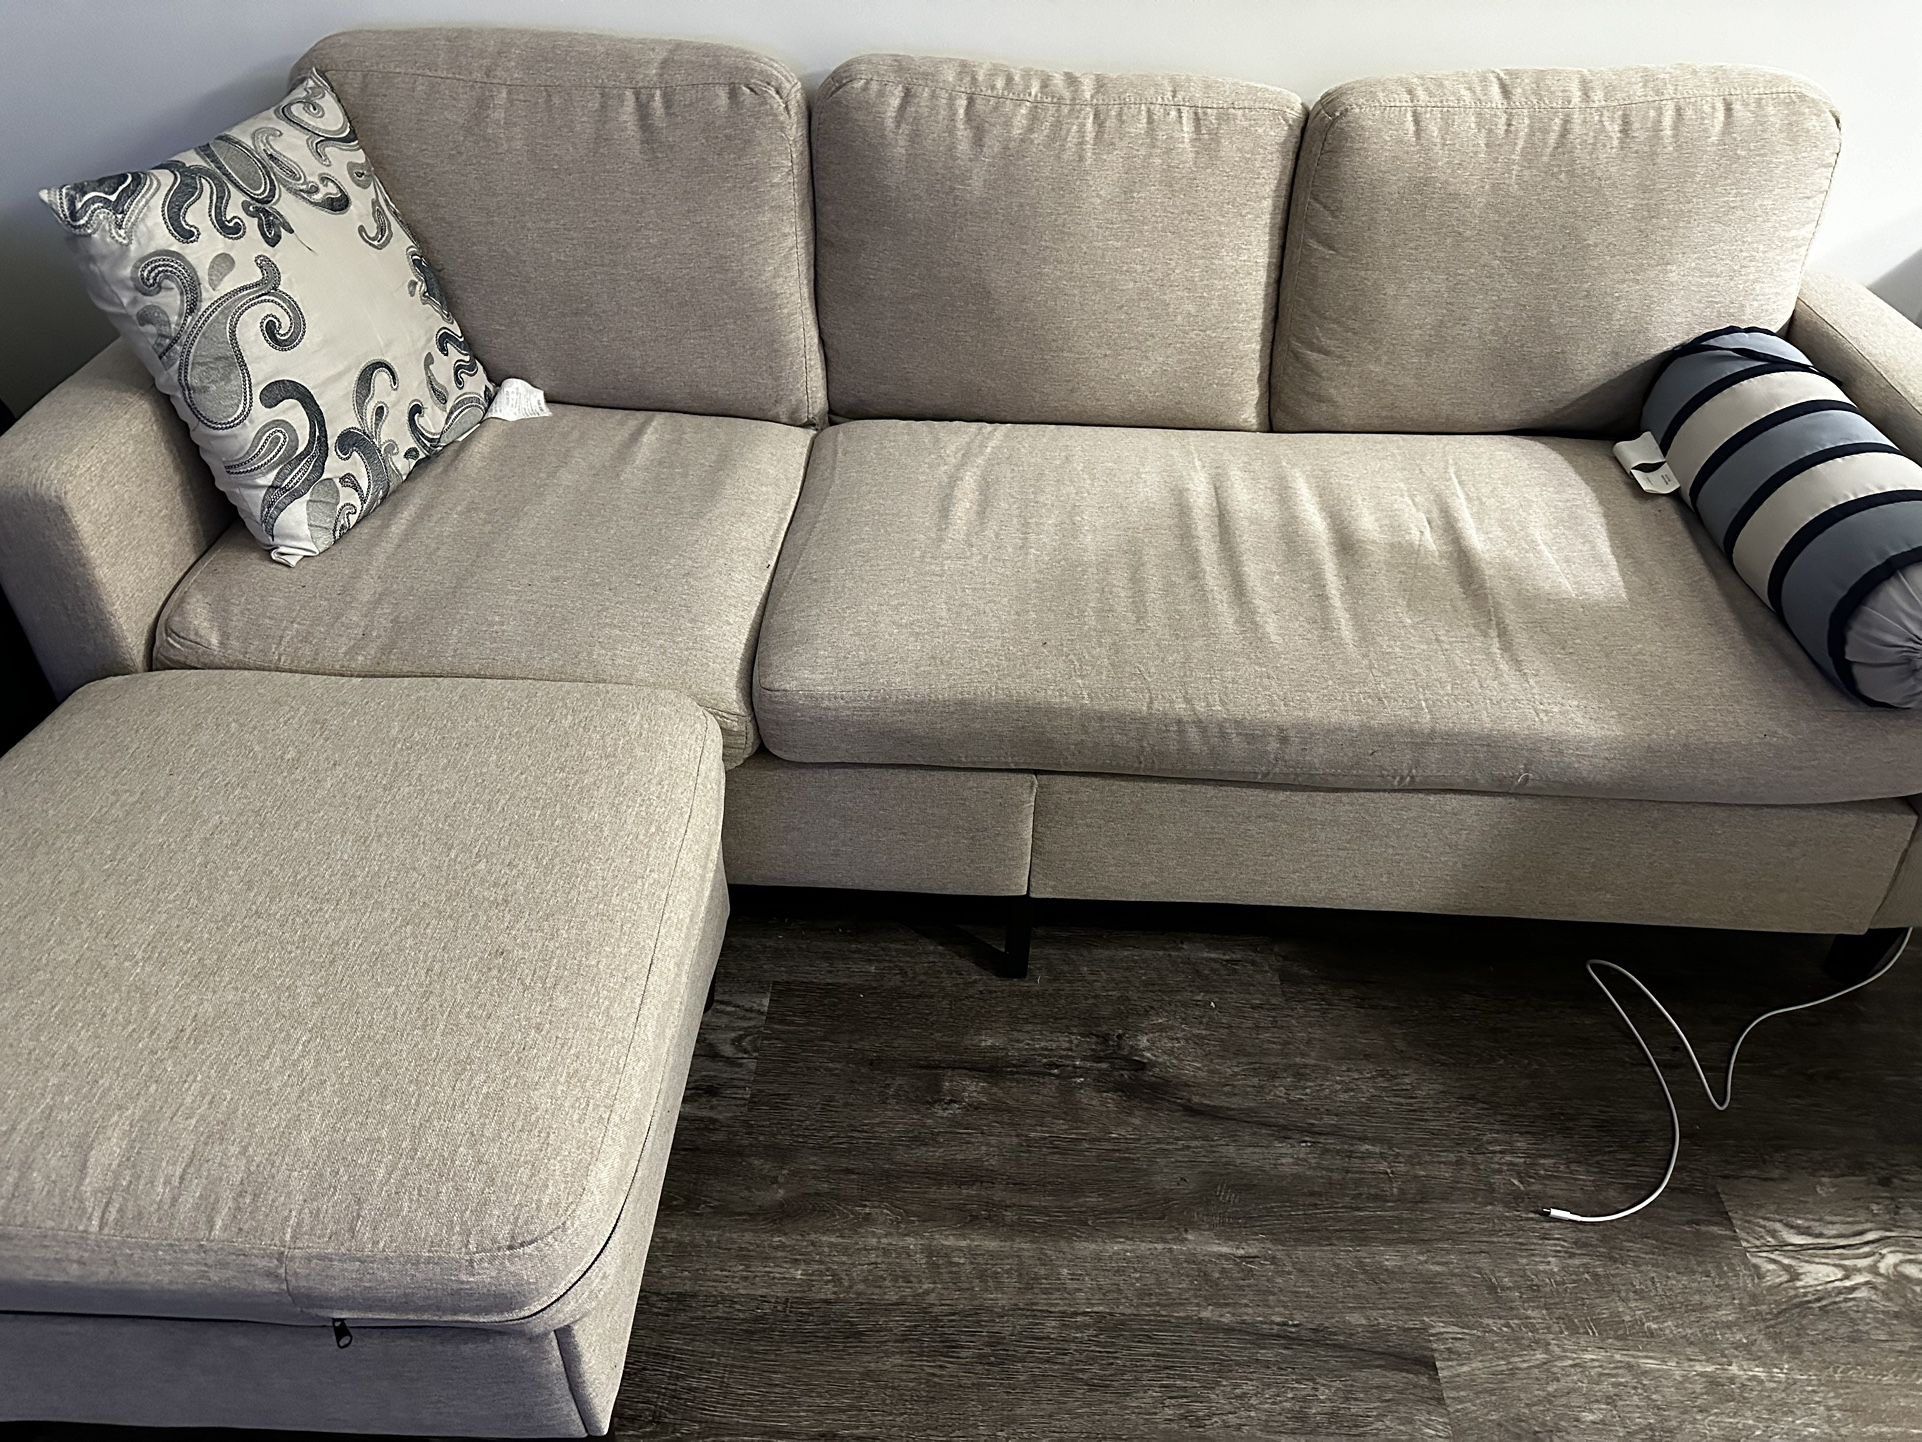 MUZZ Sectional Sofa with Movable Ottoman, Free Combination Sectional Couch, Small L Shaped Sectional